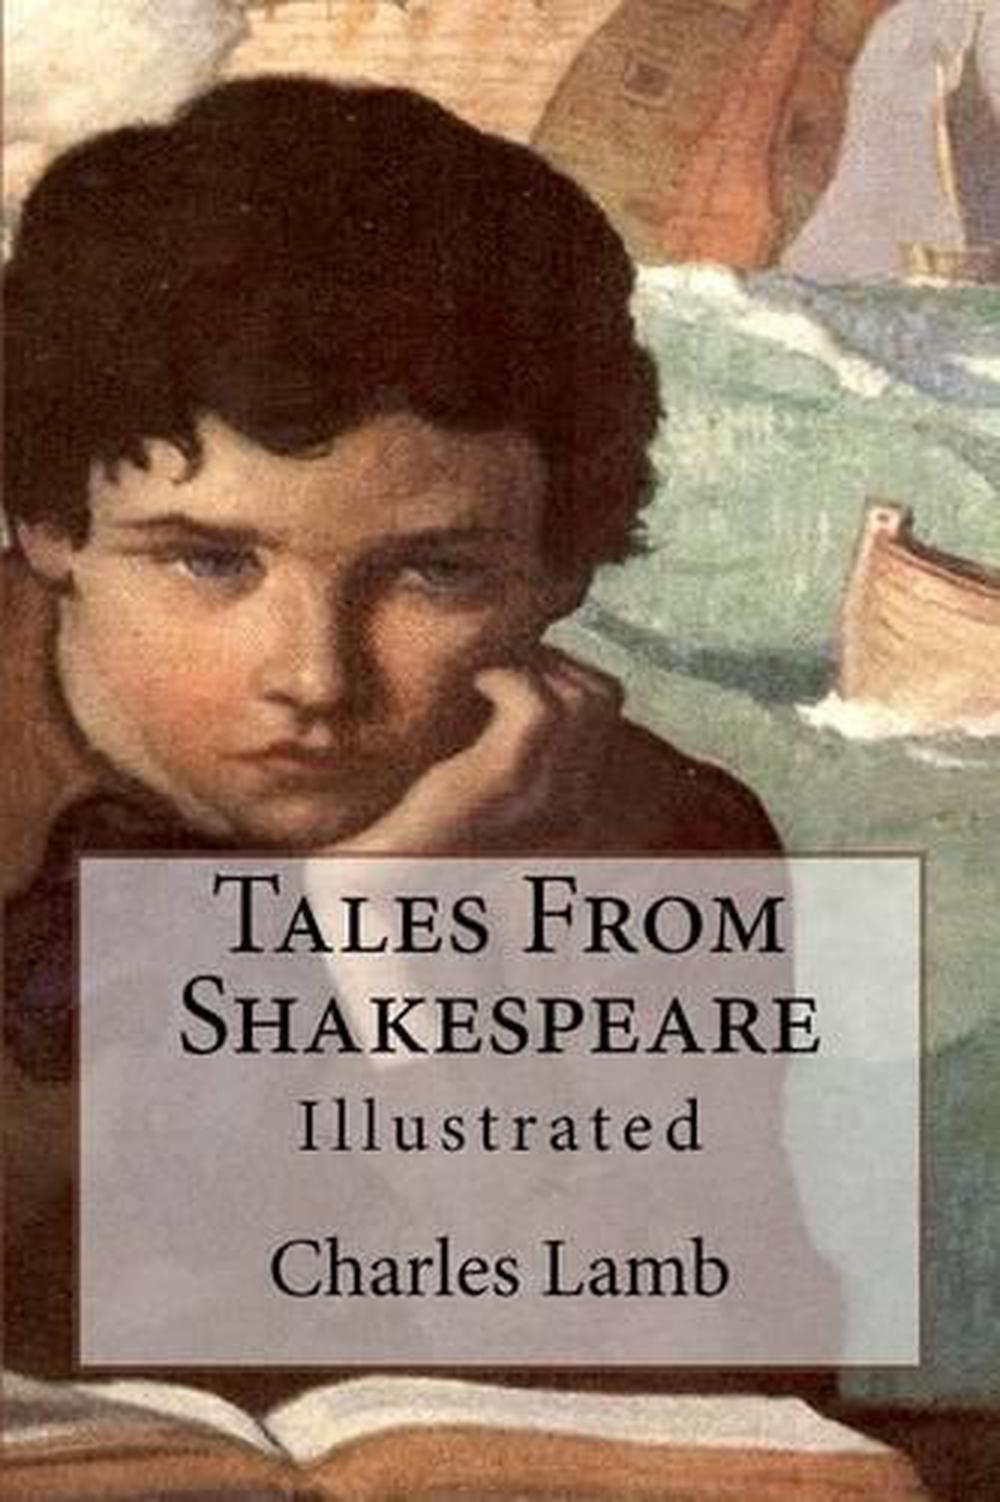 book review of tales from shakespeare